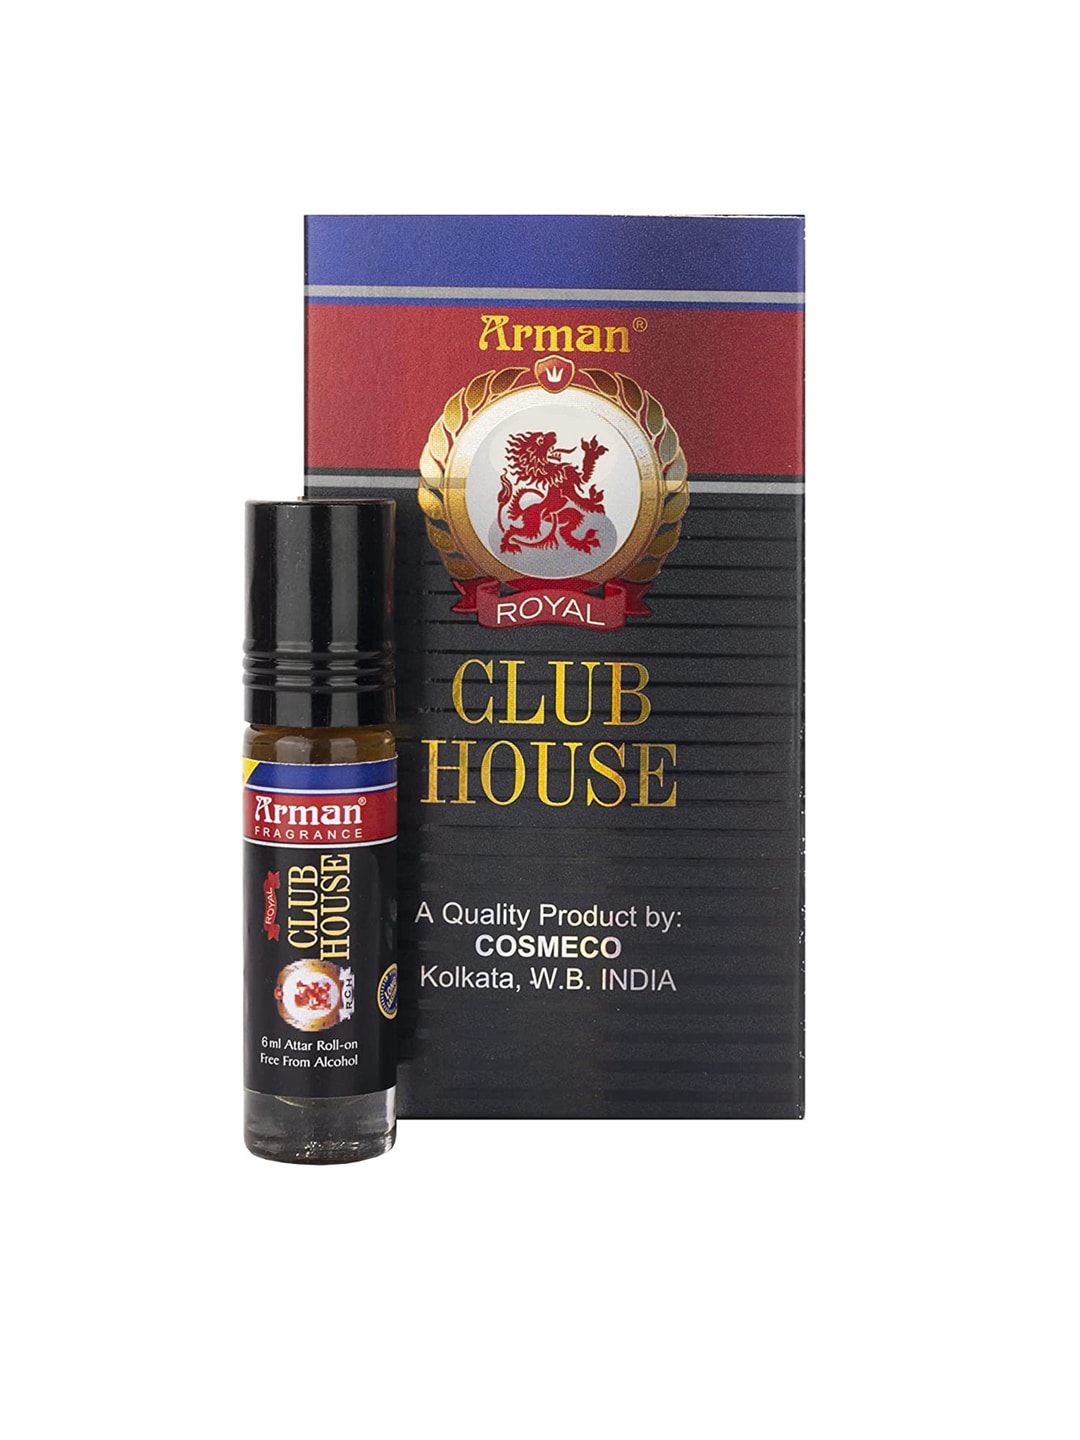 Arman Royal Club House Attar Roll On - 6 ml Price in India